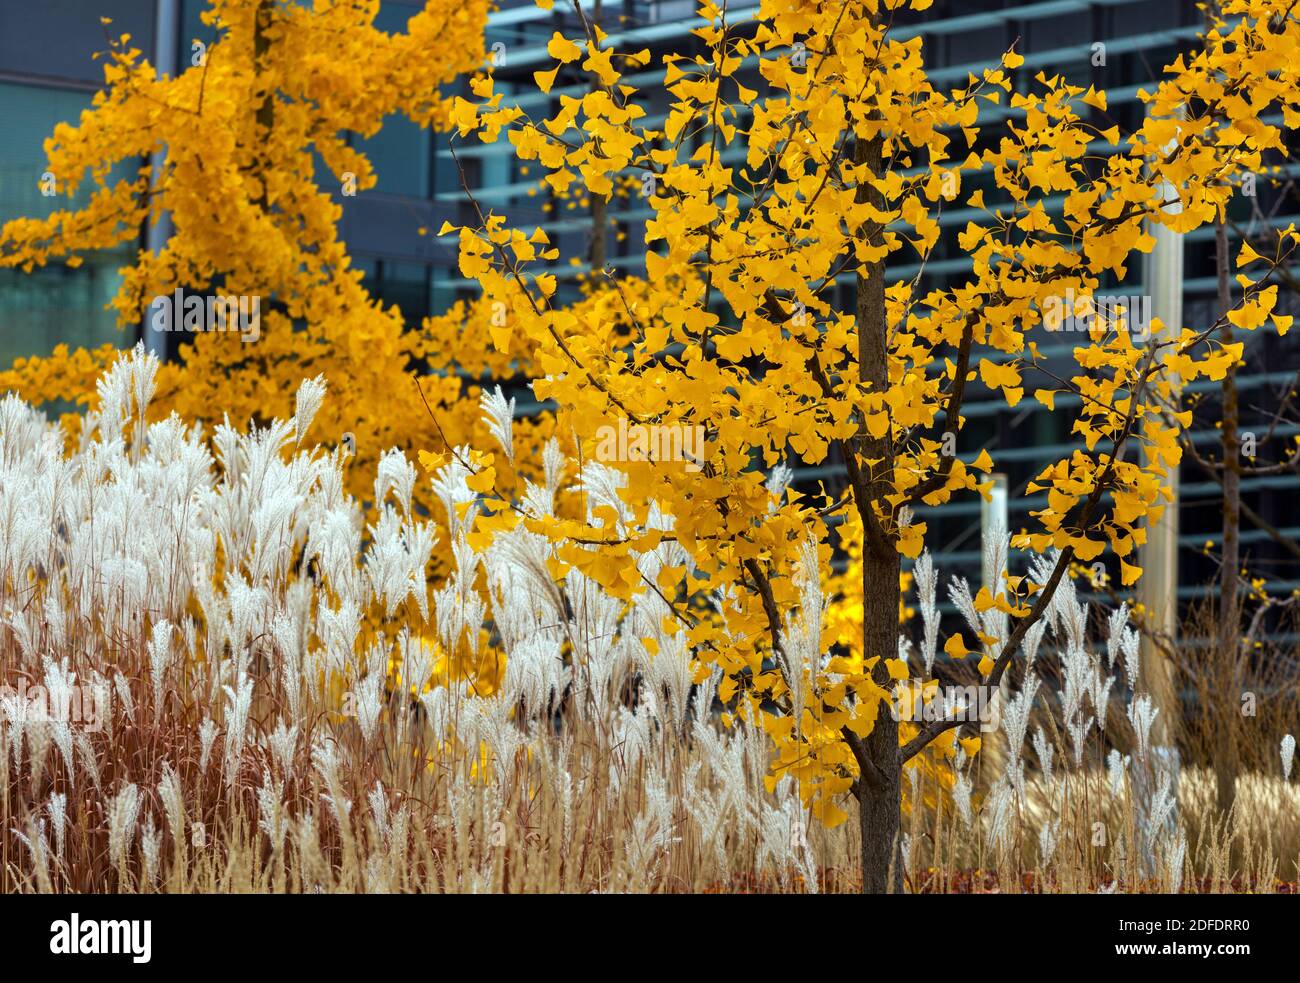 Miscanthus yellow Ginkgo biloba in autumn  grass to modern urban scenes, colorful contrast Stock Photo